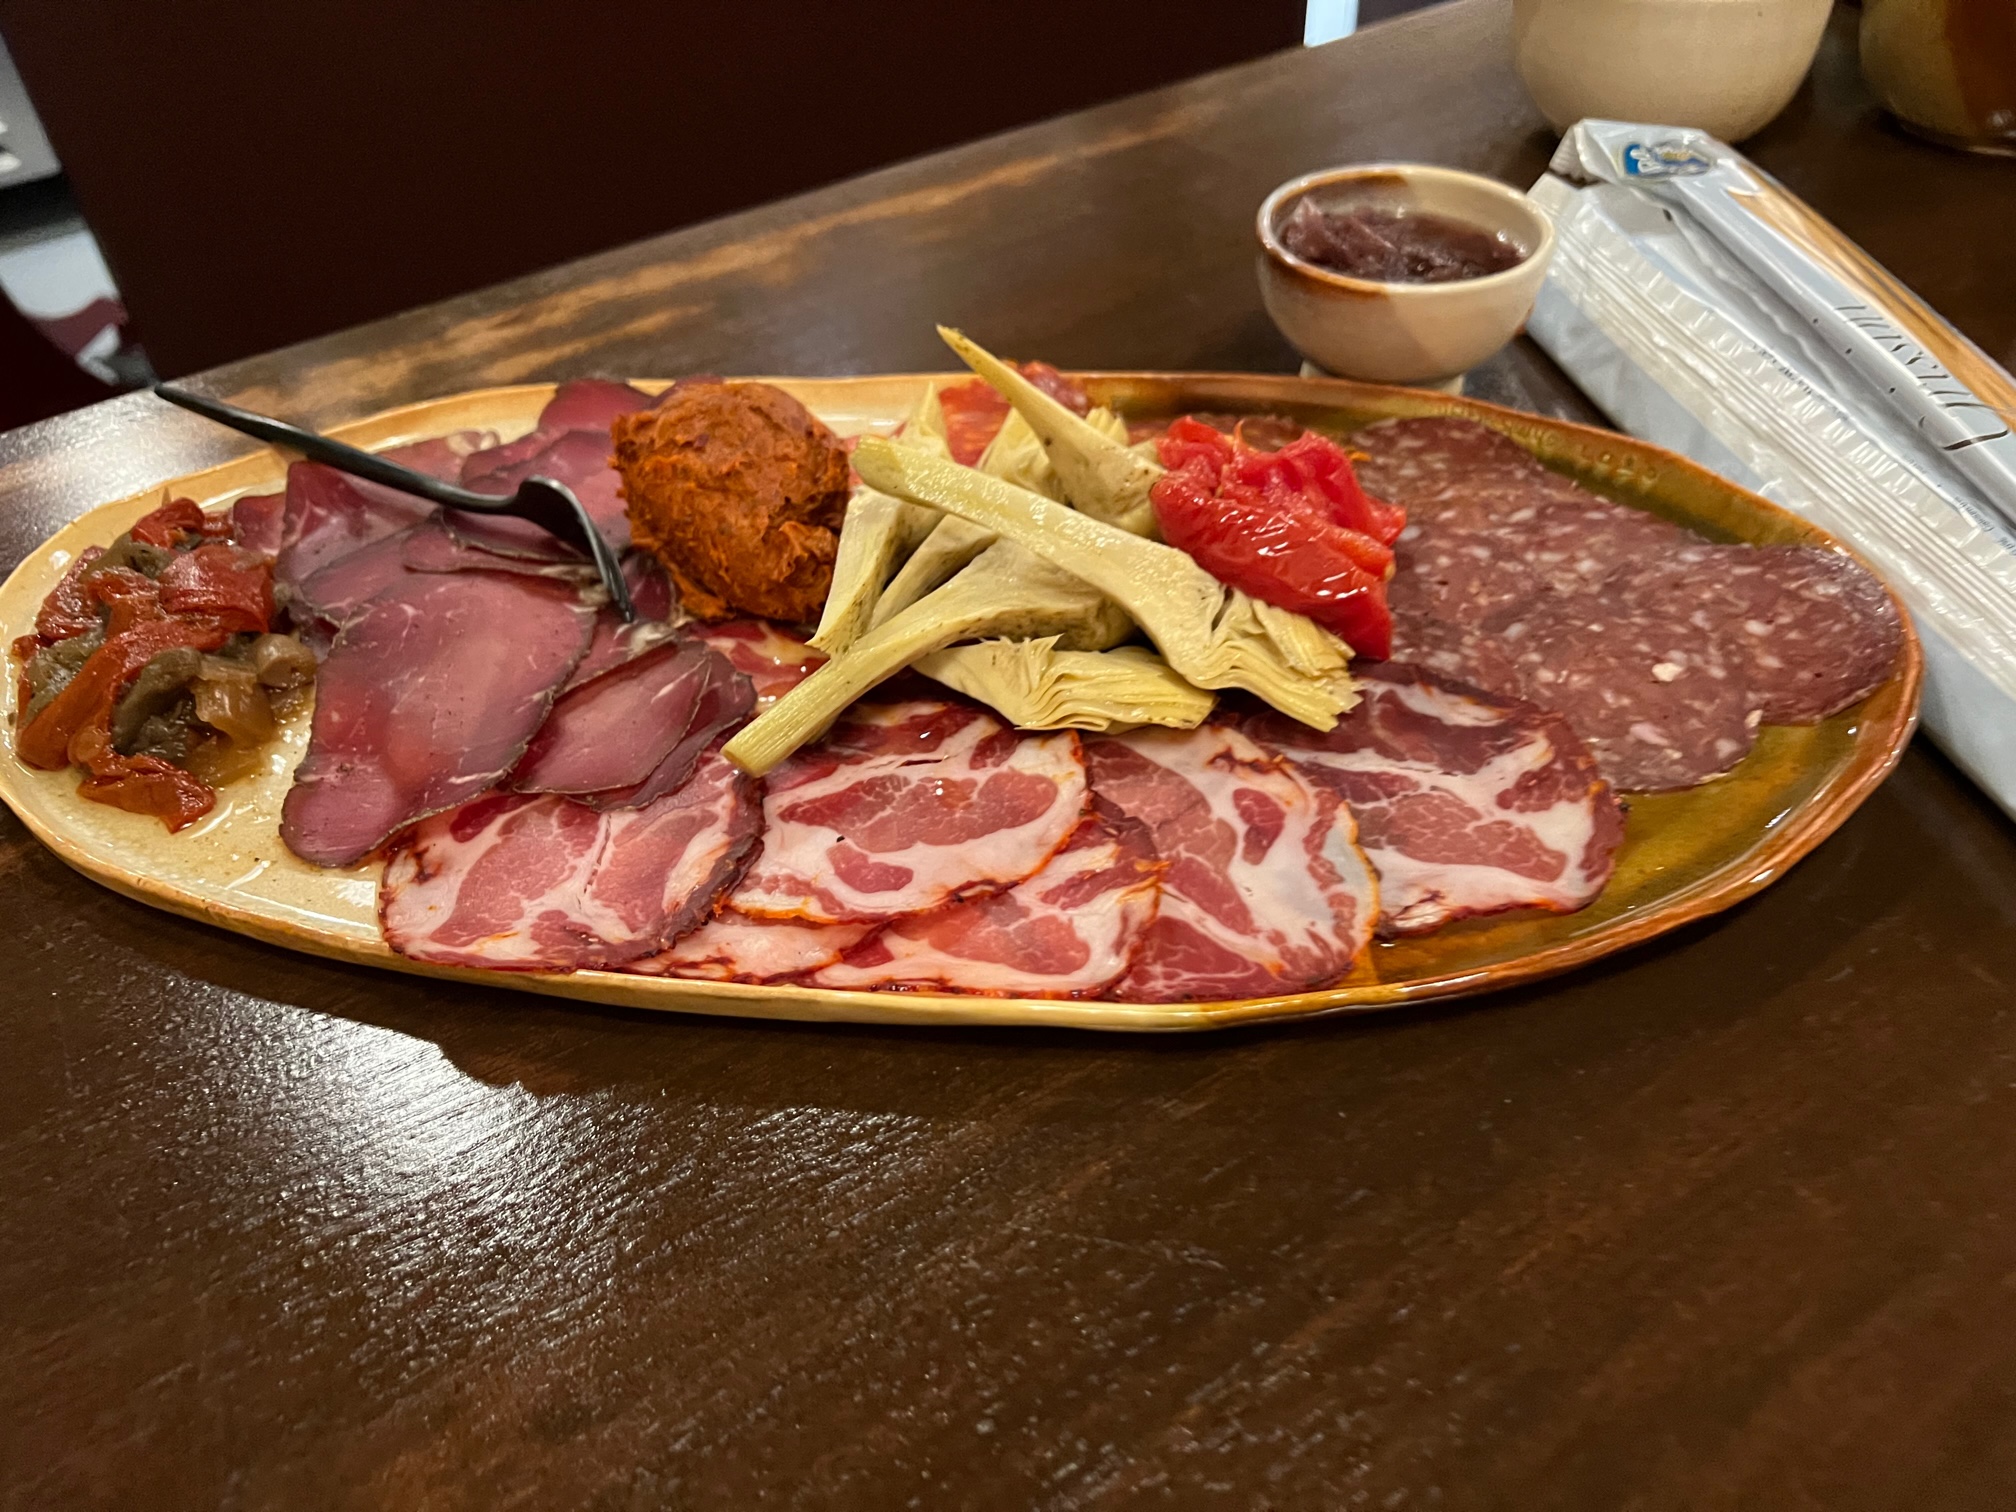 On a large platter, there are variety of cured and smoked meats. Photo by Alyssa Buckley.